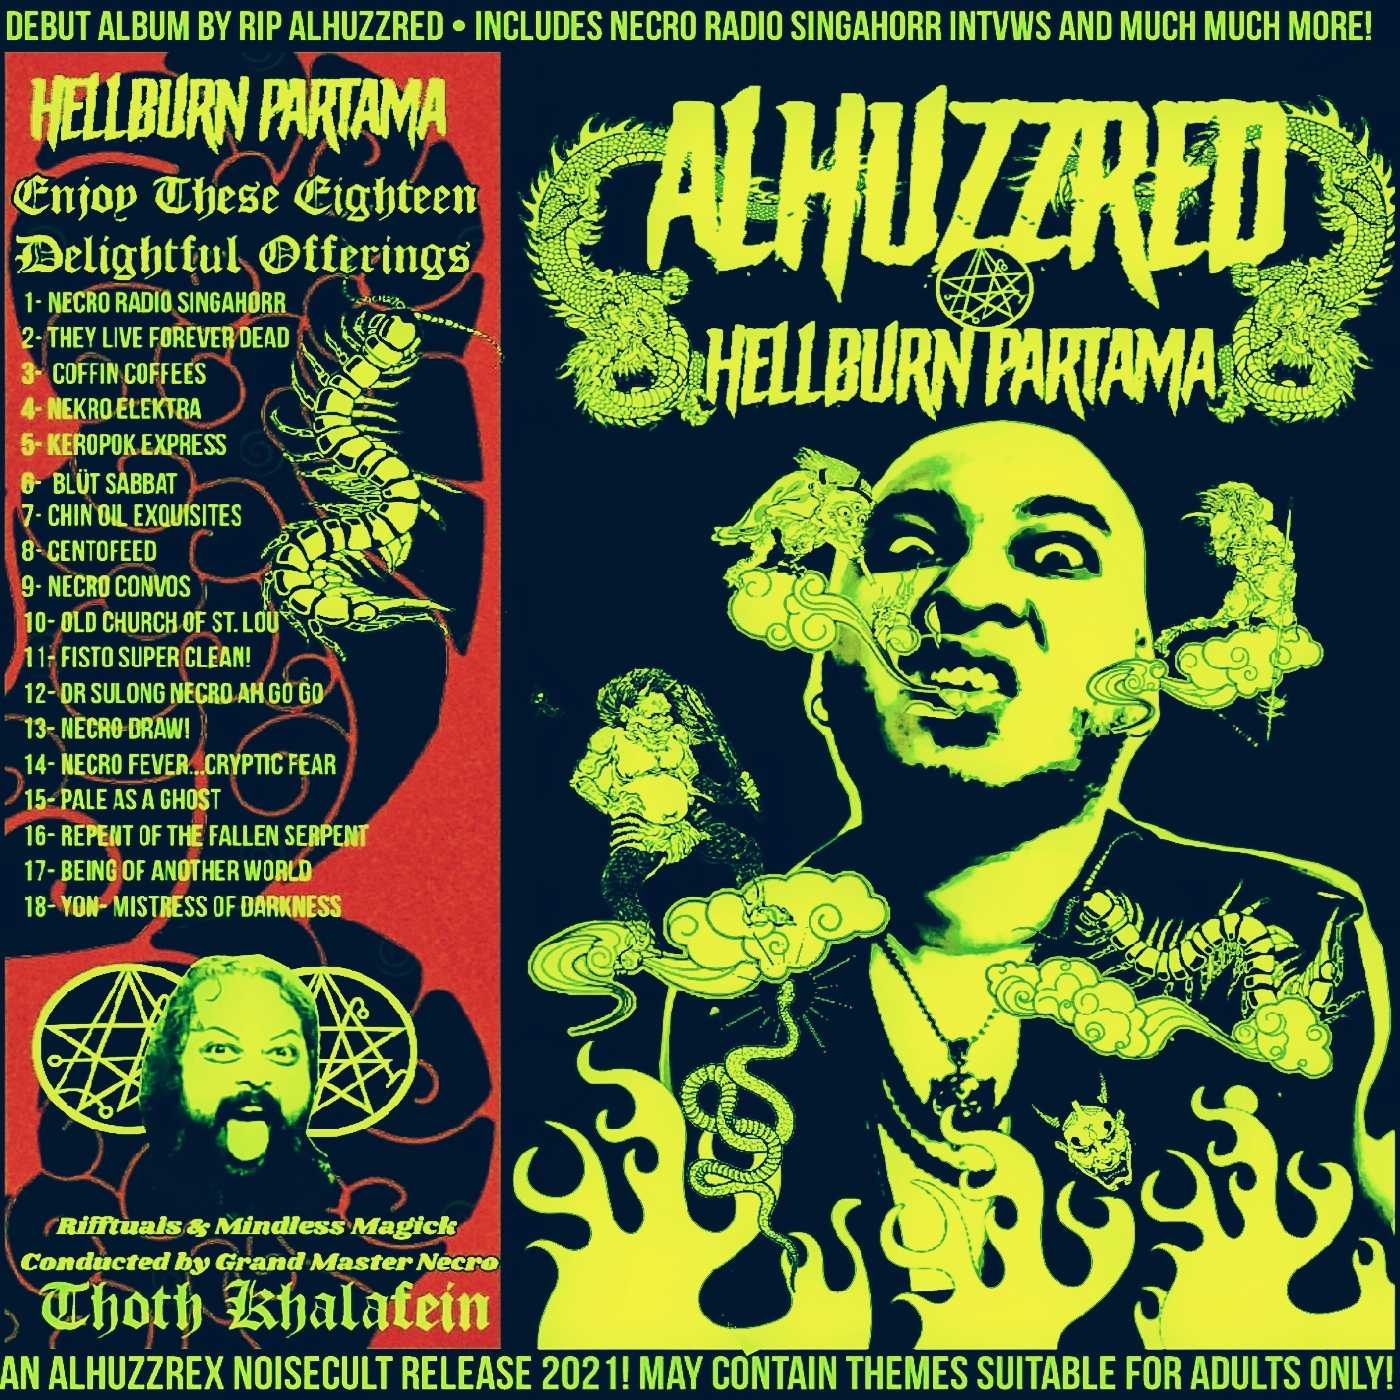 You are currently viewing ALHUZZRED from Singapore releases their solo debut album “Hellburn Partama”.